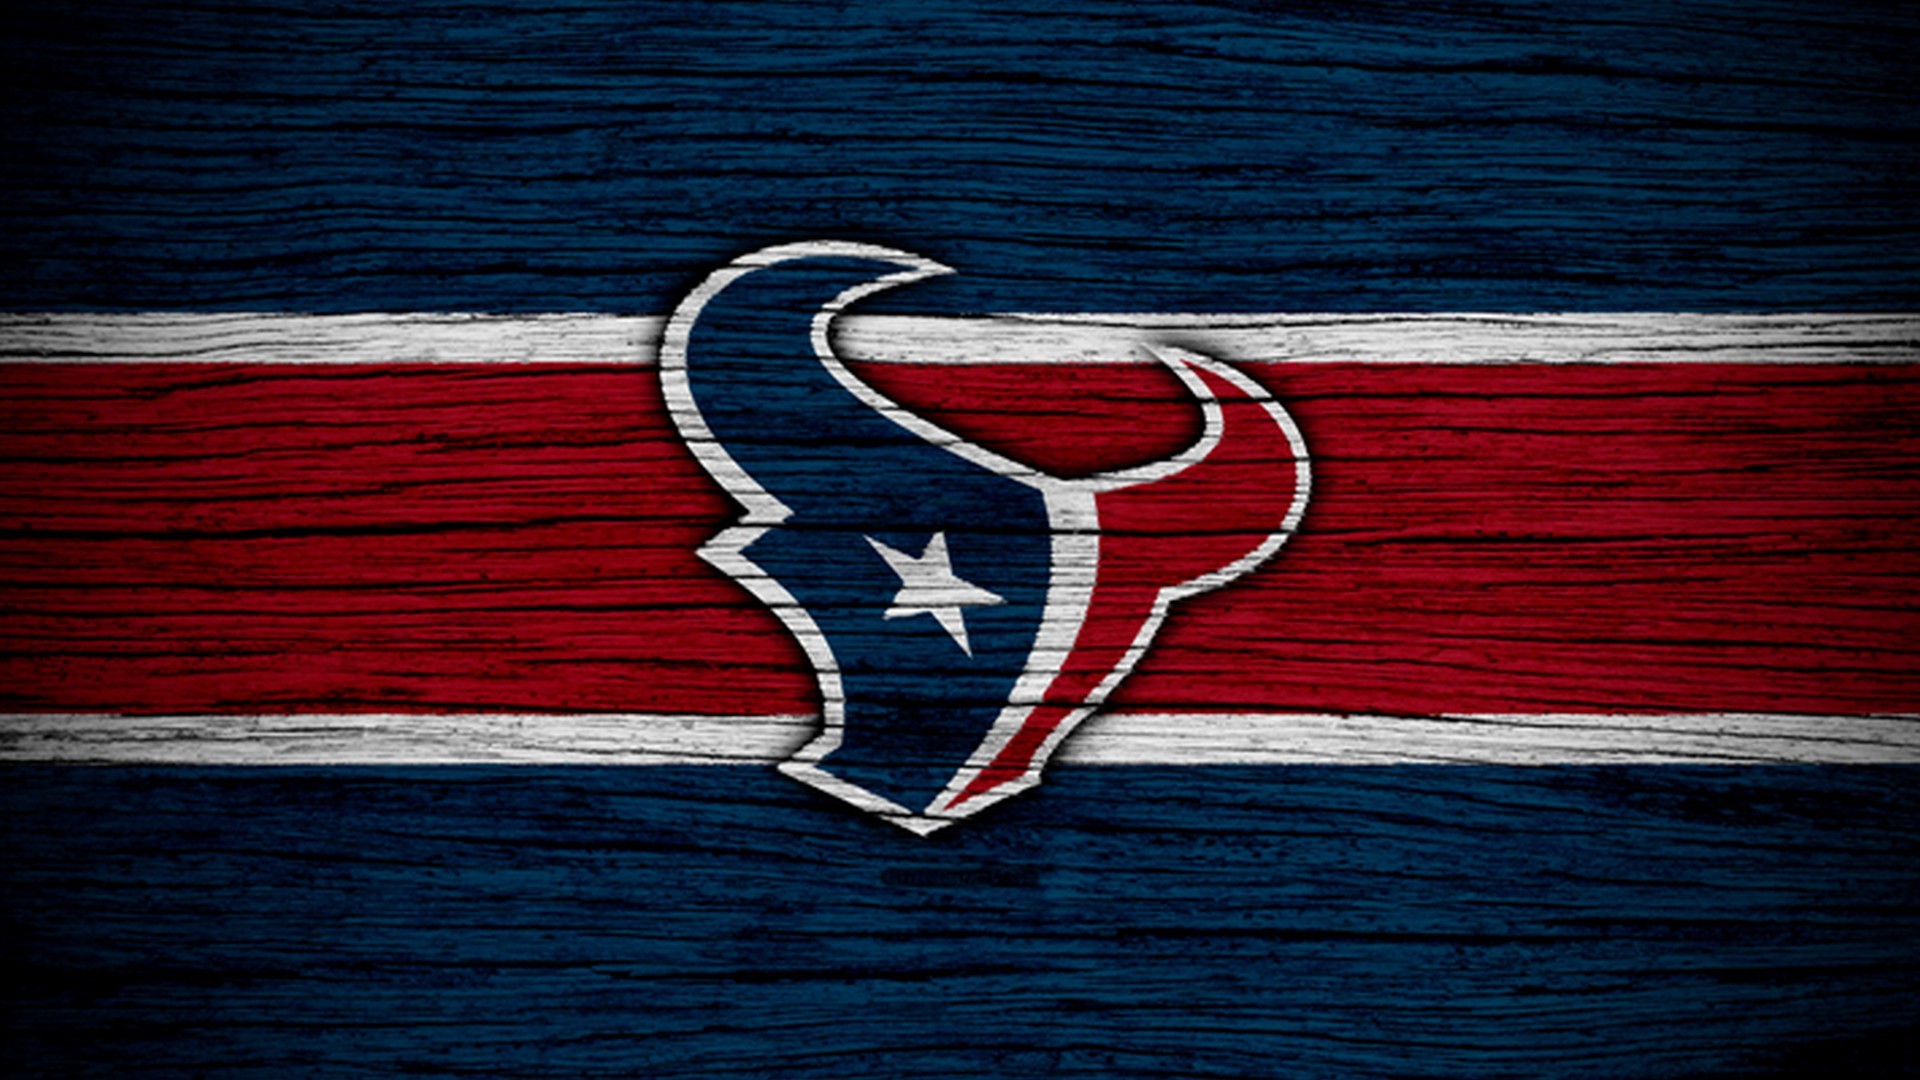 1920x1080 Houston Texans NFL Desktop Wallpaper with resolution  pixel. You  can make this wallpaper for